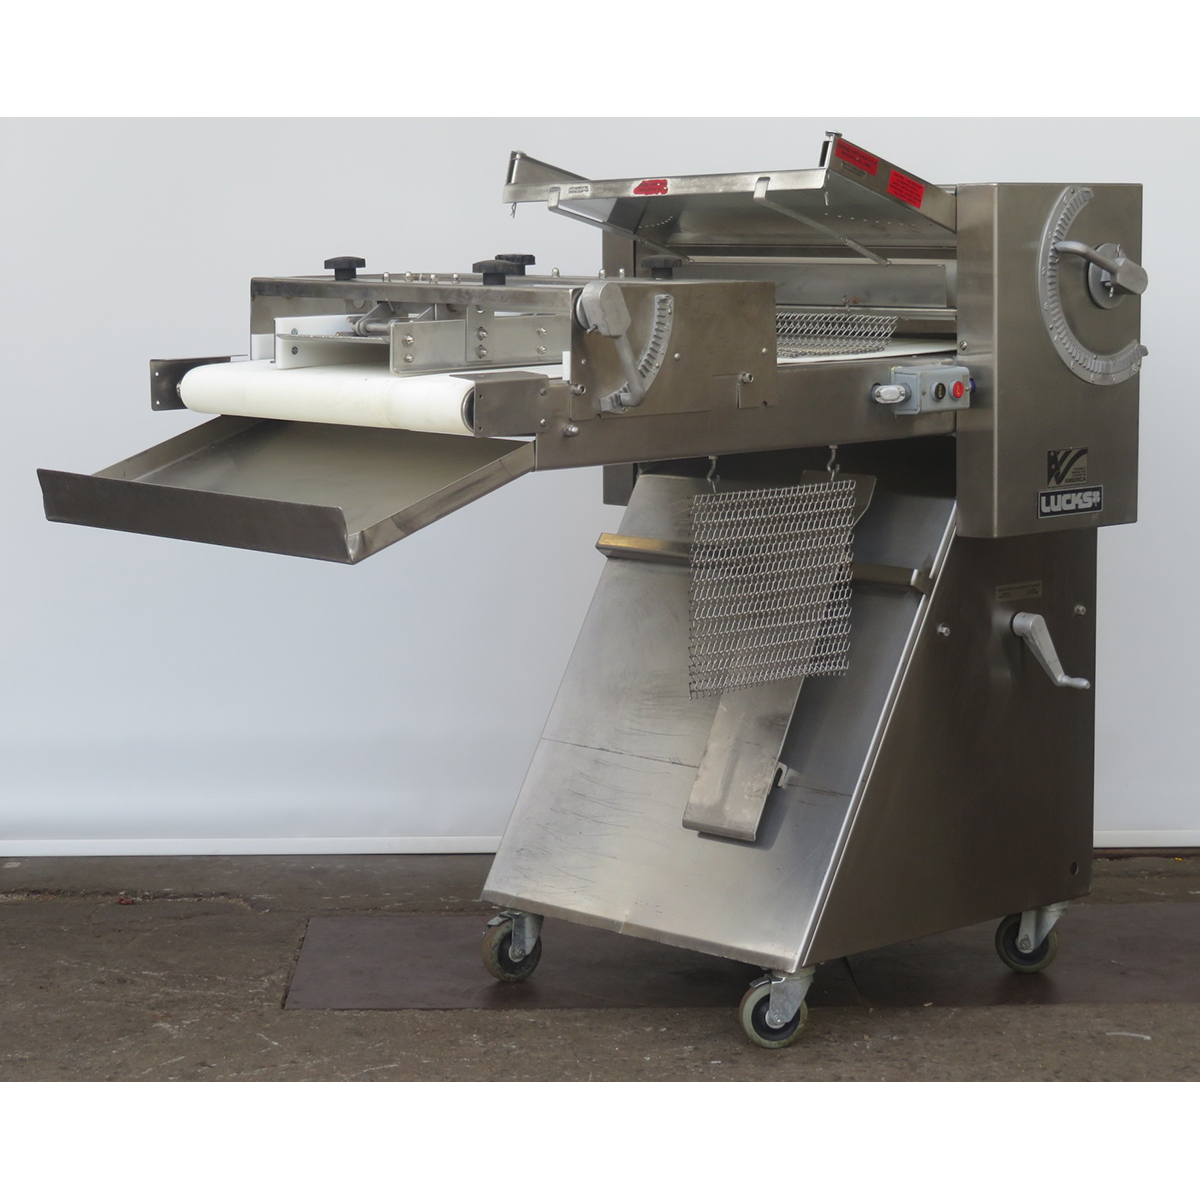 Lucks LSM24 Bread Moulder Sheeter, Used Great Condition